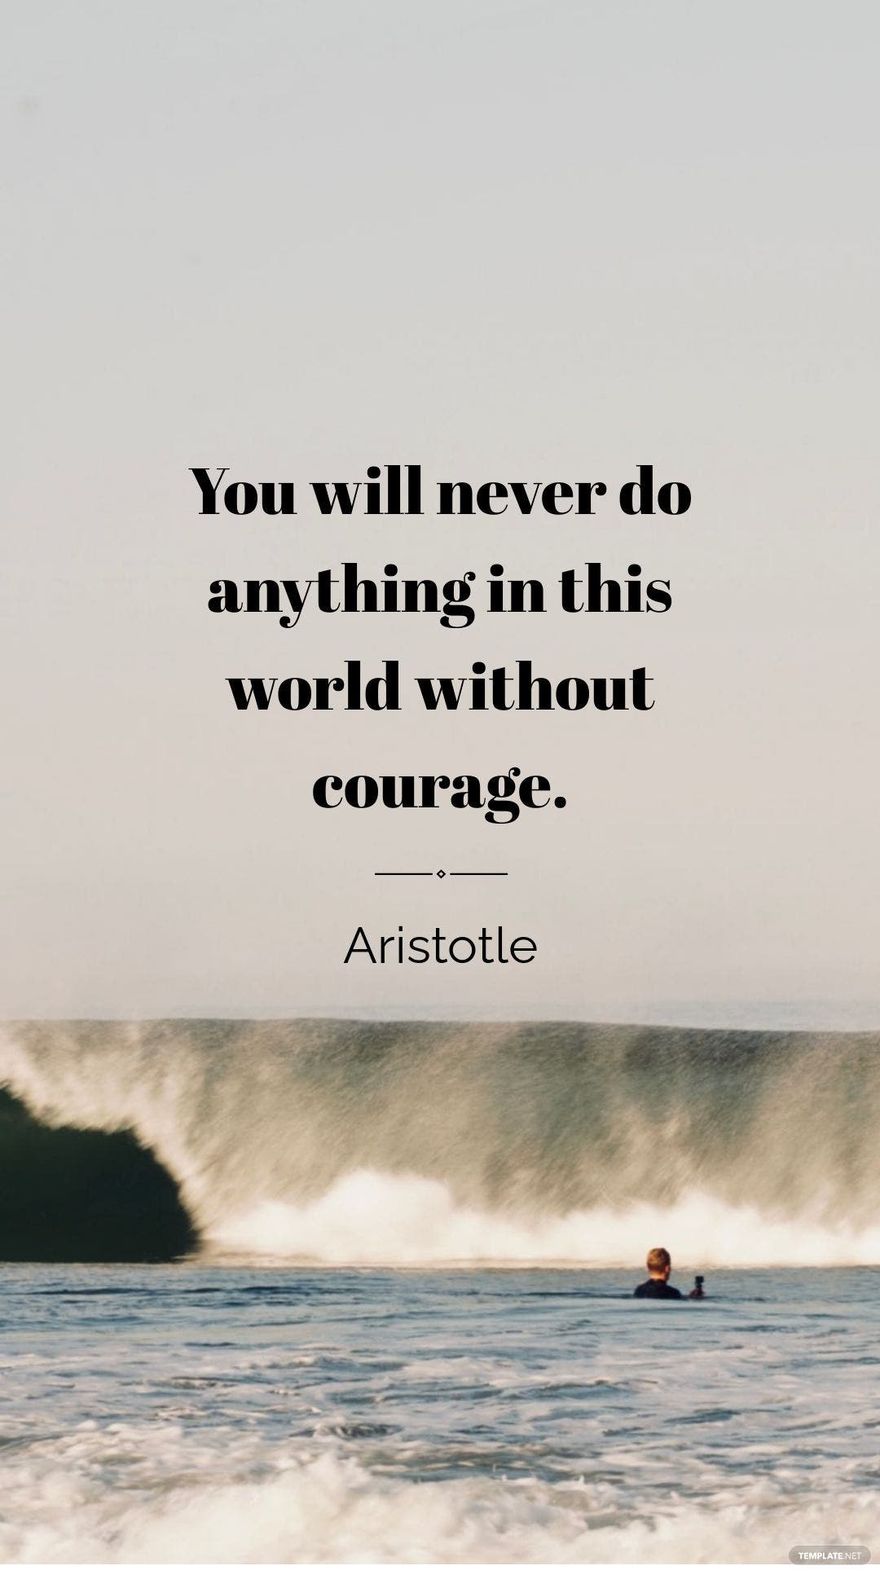 Aristotle - You will never do anything in this world without courage ...